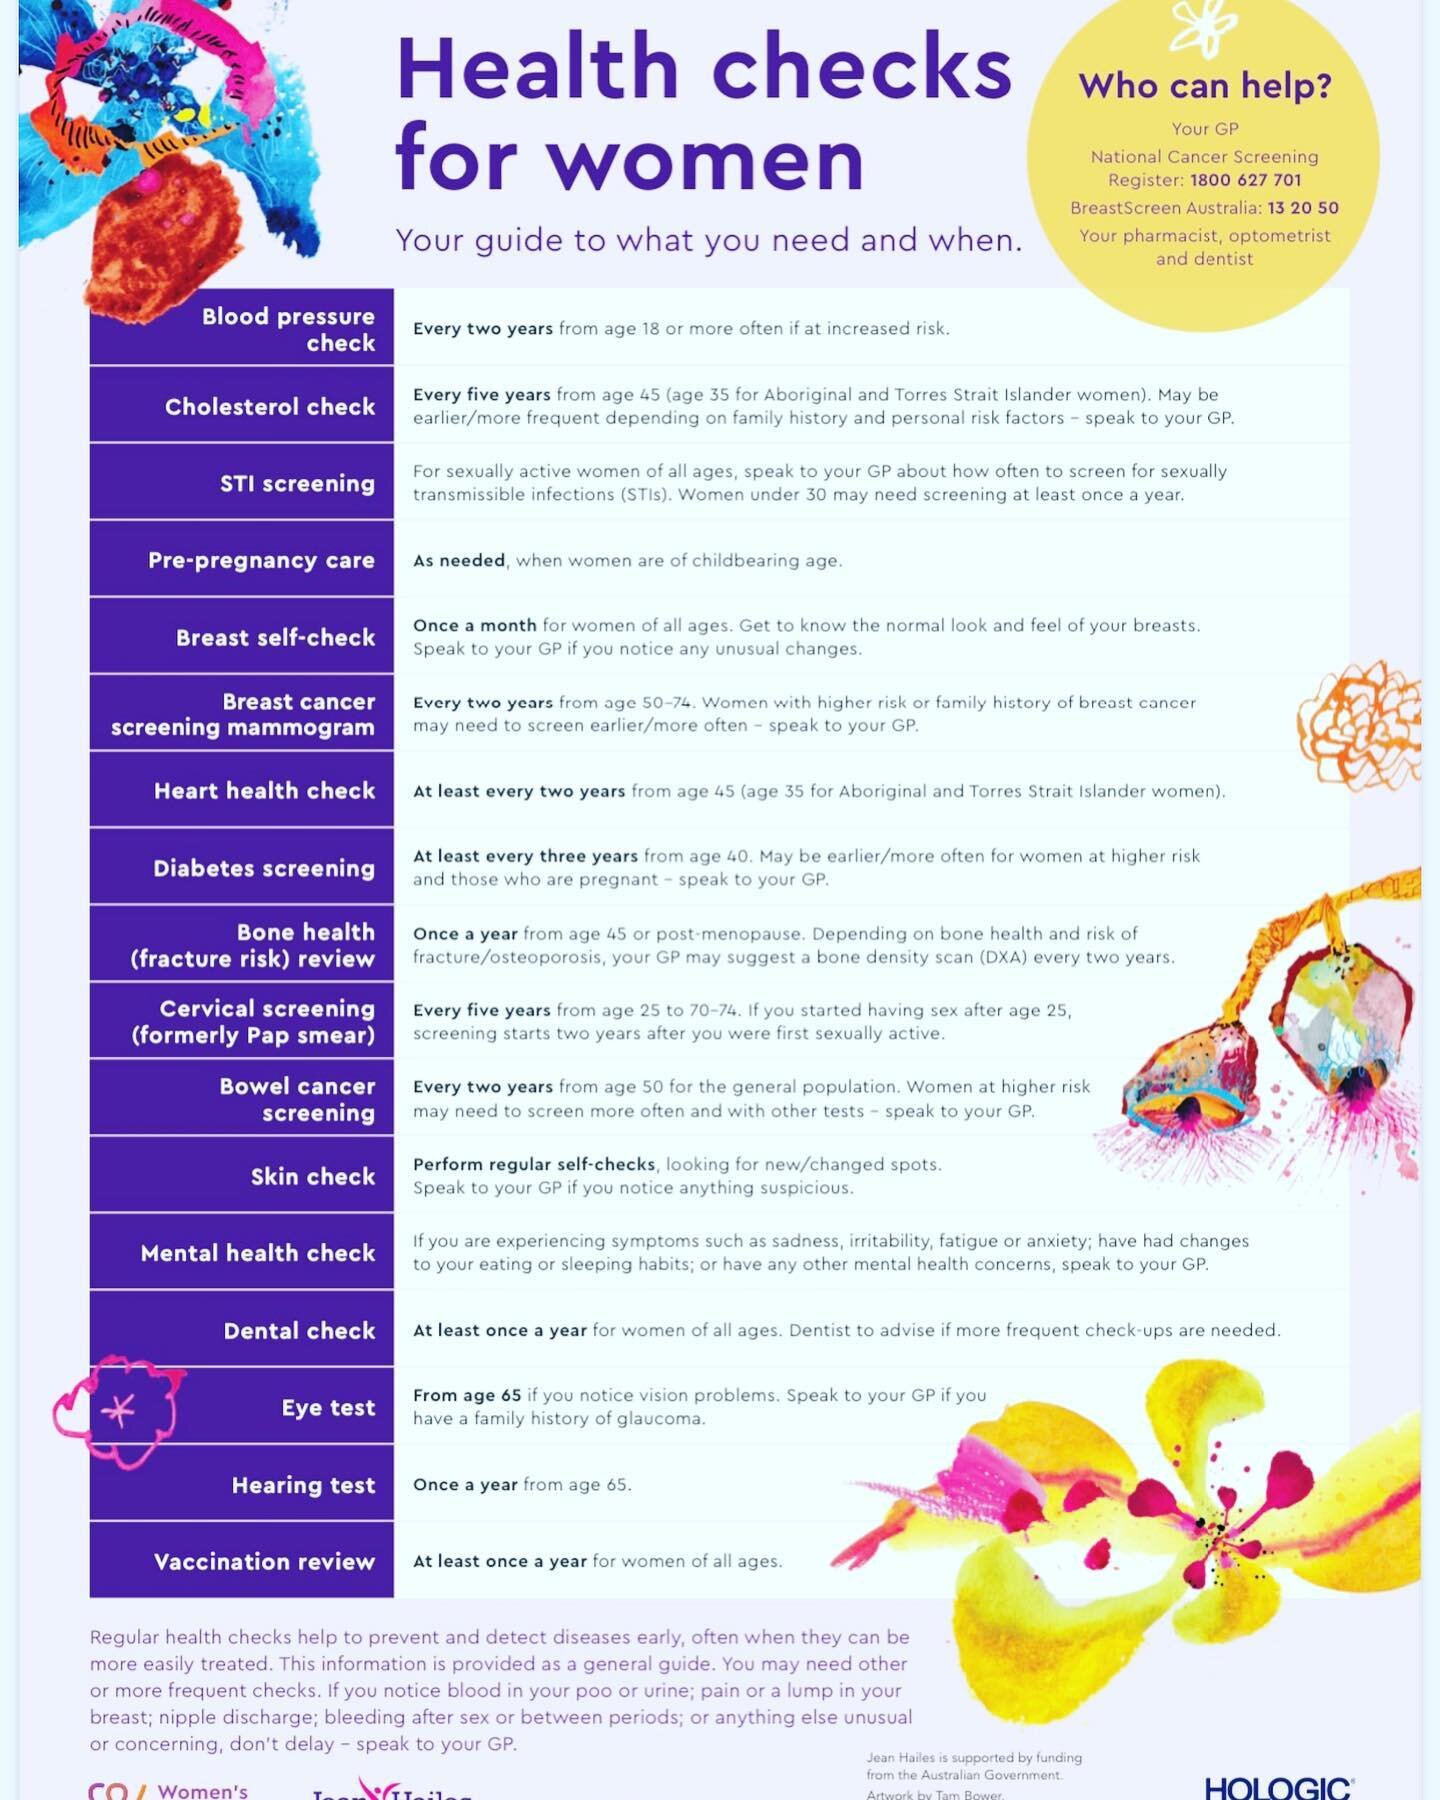 🌸Women's Health Week 🌸
Here is a guide to the health checks and screening recommended for women throughout the different life stages - your GP and  Practice Nurse can perform most  of these to check for certain conditions and help keep you at optim